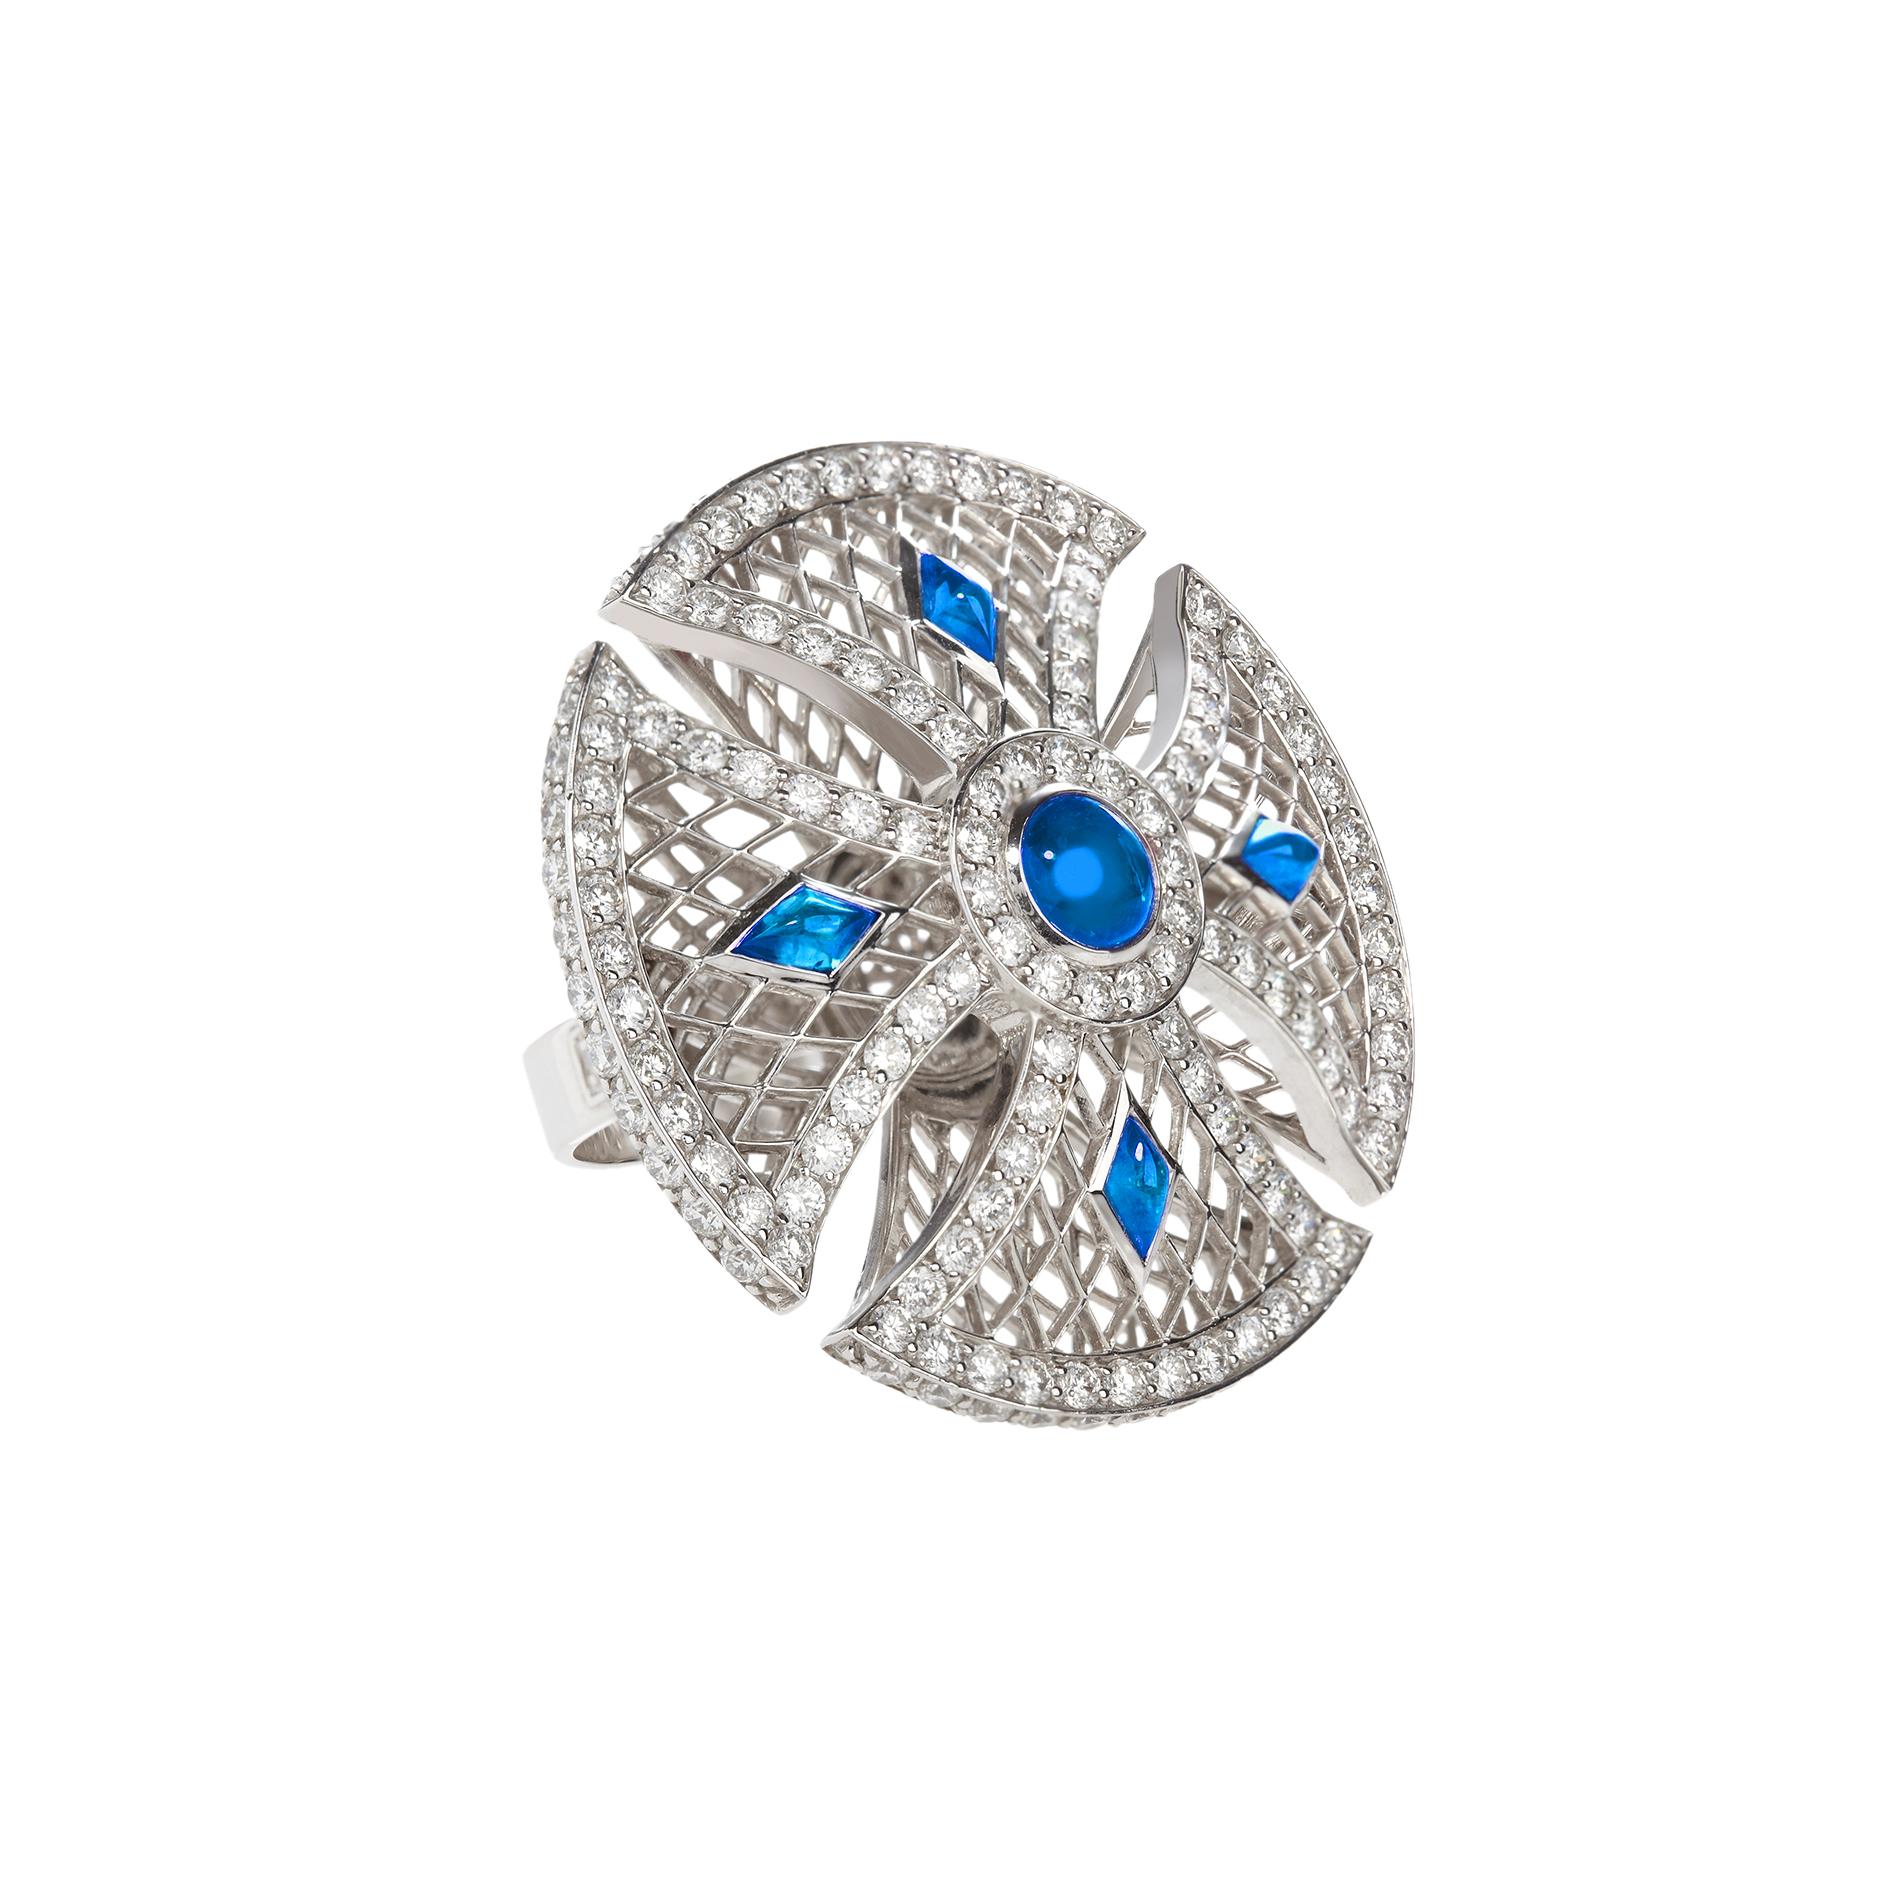 The Sybarite Heritage Collection draws on centuries of tradition and sovereign imagery. Crafted from the finest white gold, this piece is set alight with diamonds and vibrant sapphires.

Steeped in heritage, this piece turns to the Maltese Cross for